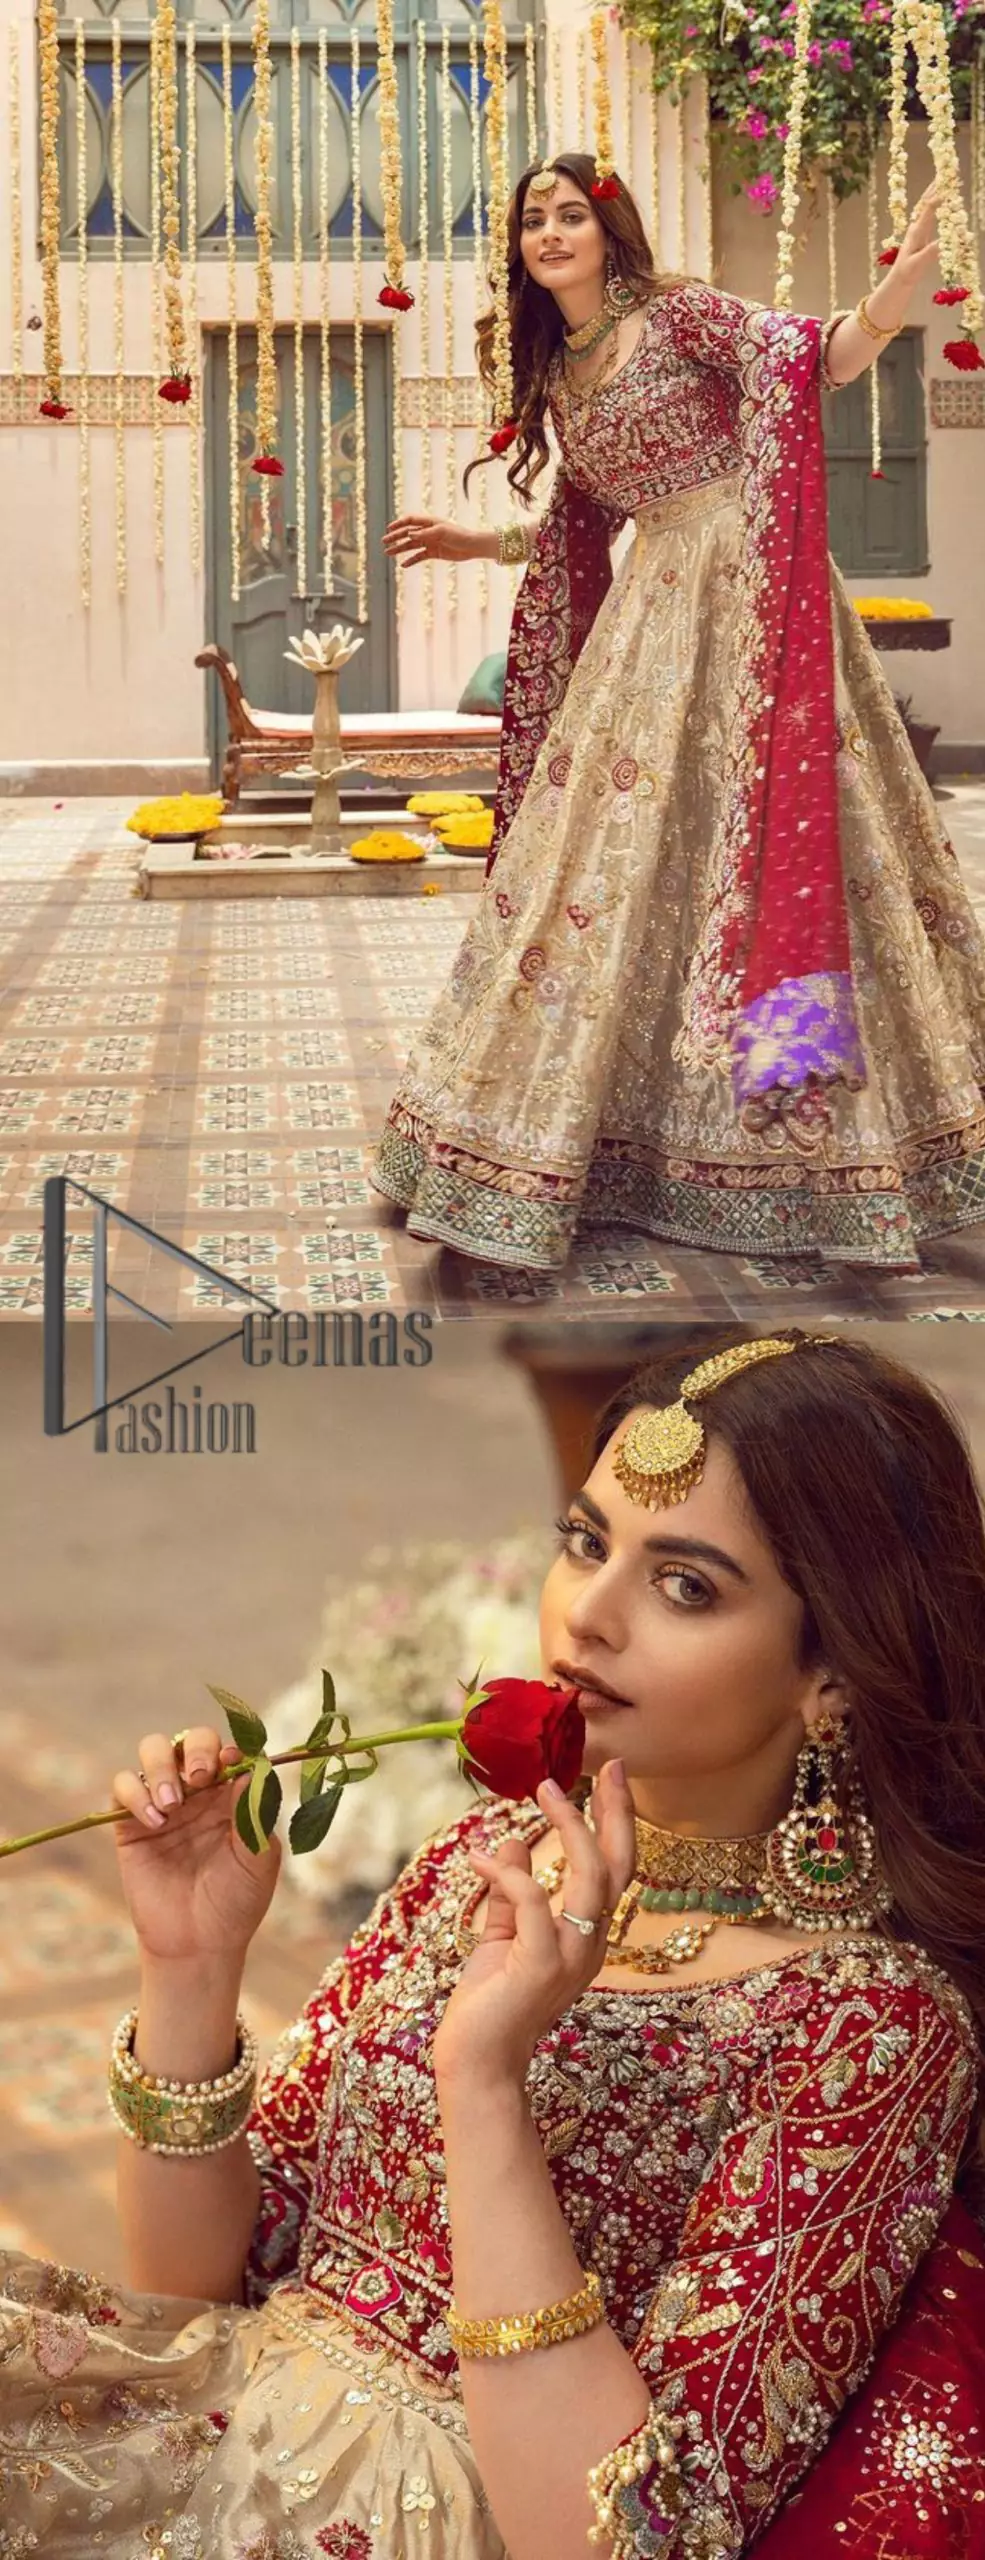 It's distinctive how the new-gen brides are welcoming red and beige shades for their bridal outfits as well. So Welcome your guest to this charming beige lehenga. The three quarter-sleeved Red Blouse got it all for you. In addition to this, the Beige lehenga has embellished border embroidery and floral embroidery in dabka, kora work that give the stunning look. Furthermore, it is enhanced with embroidered applique bottom. The organza red dupatta that has a scalloped applique border all around the edges makes the look complete and comprehensive.